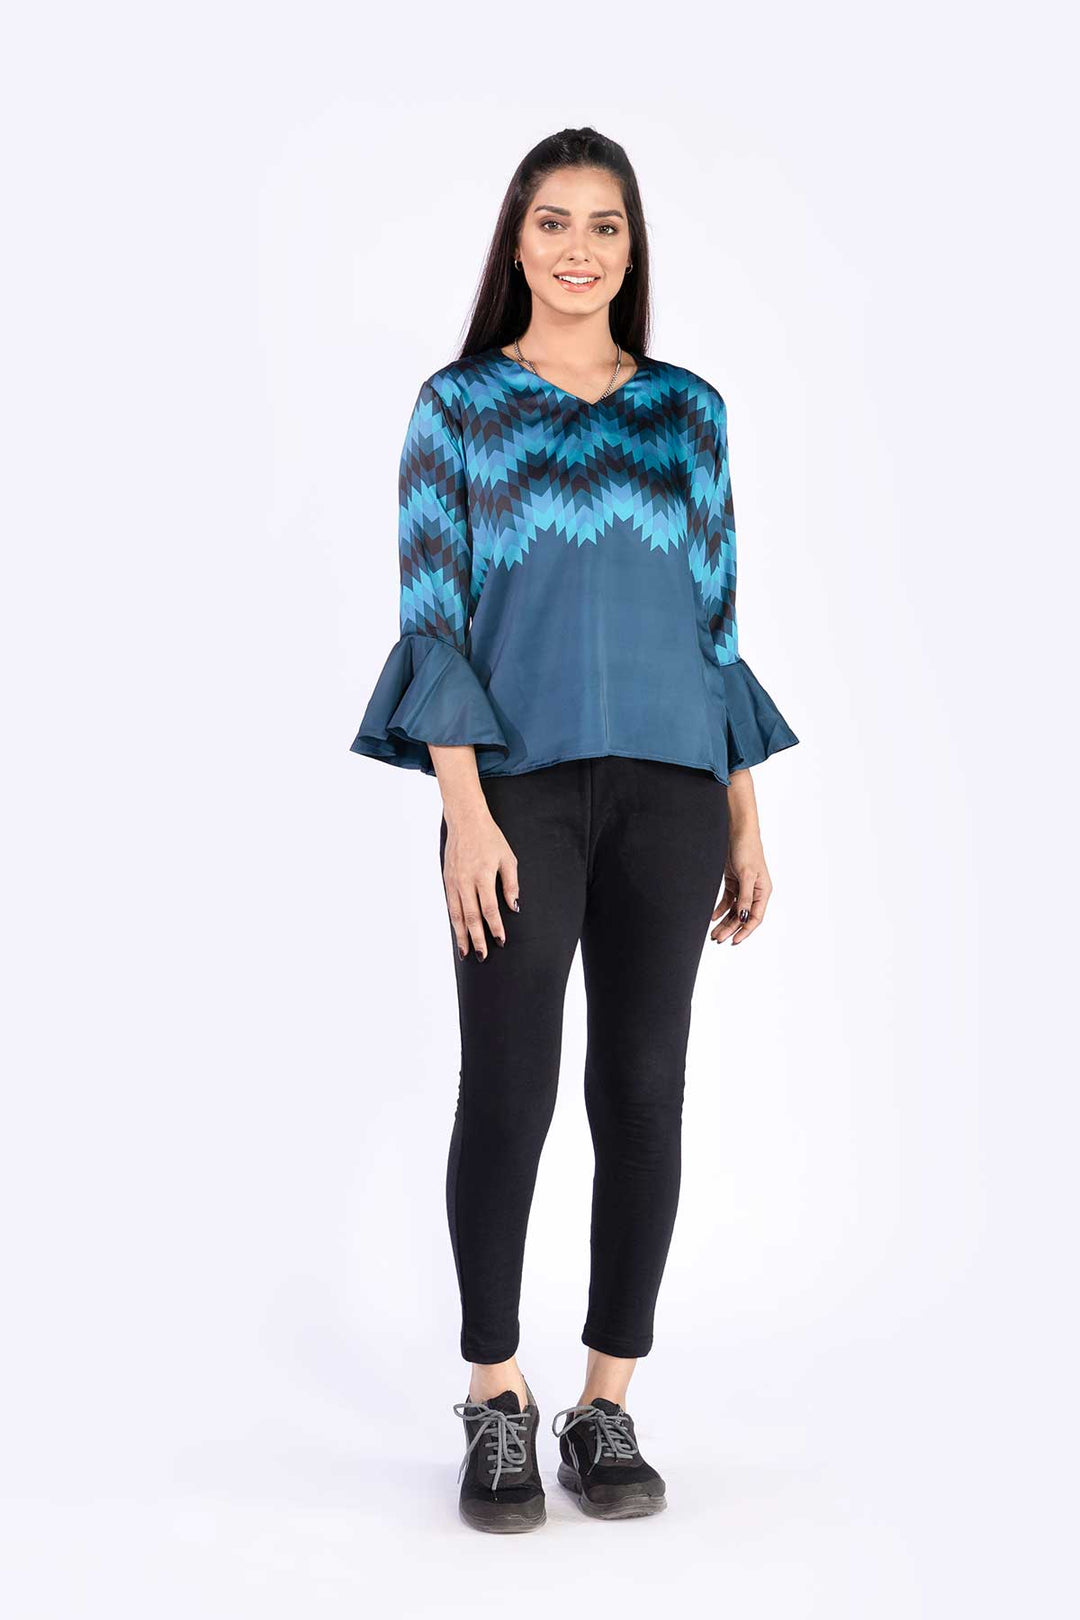 Aztec Flared Sleeves Top - A21 - WWT0007